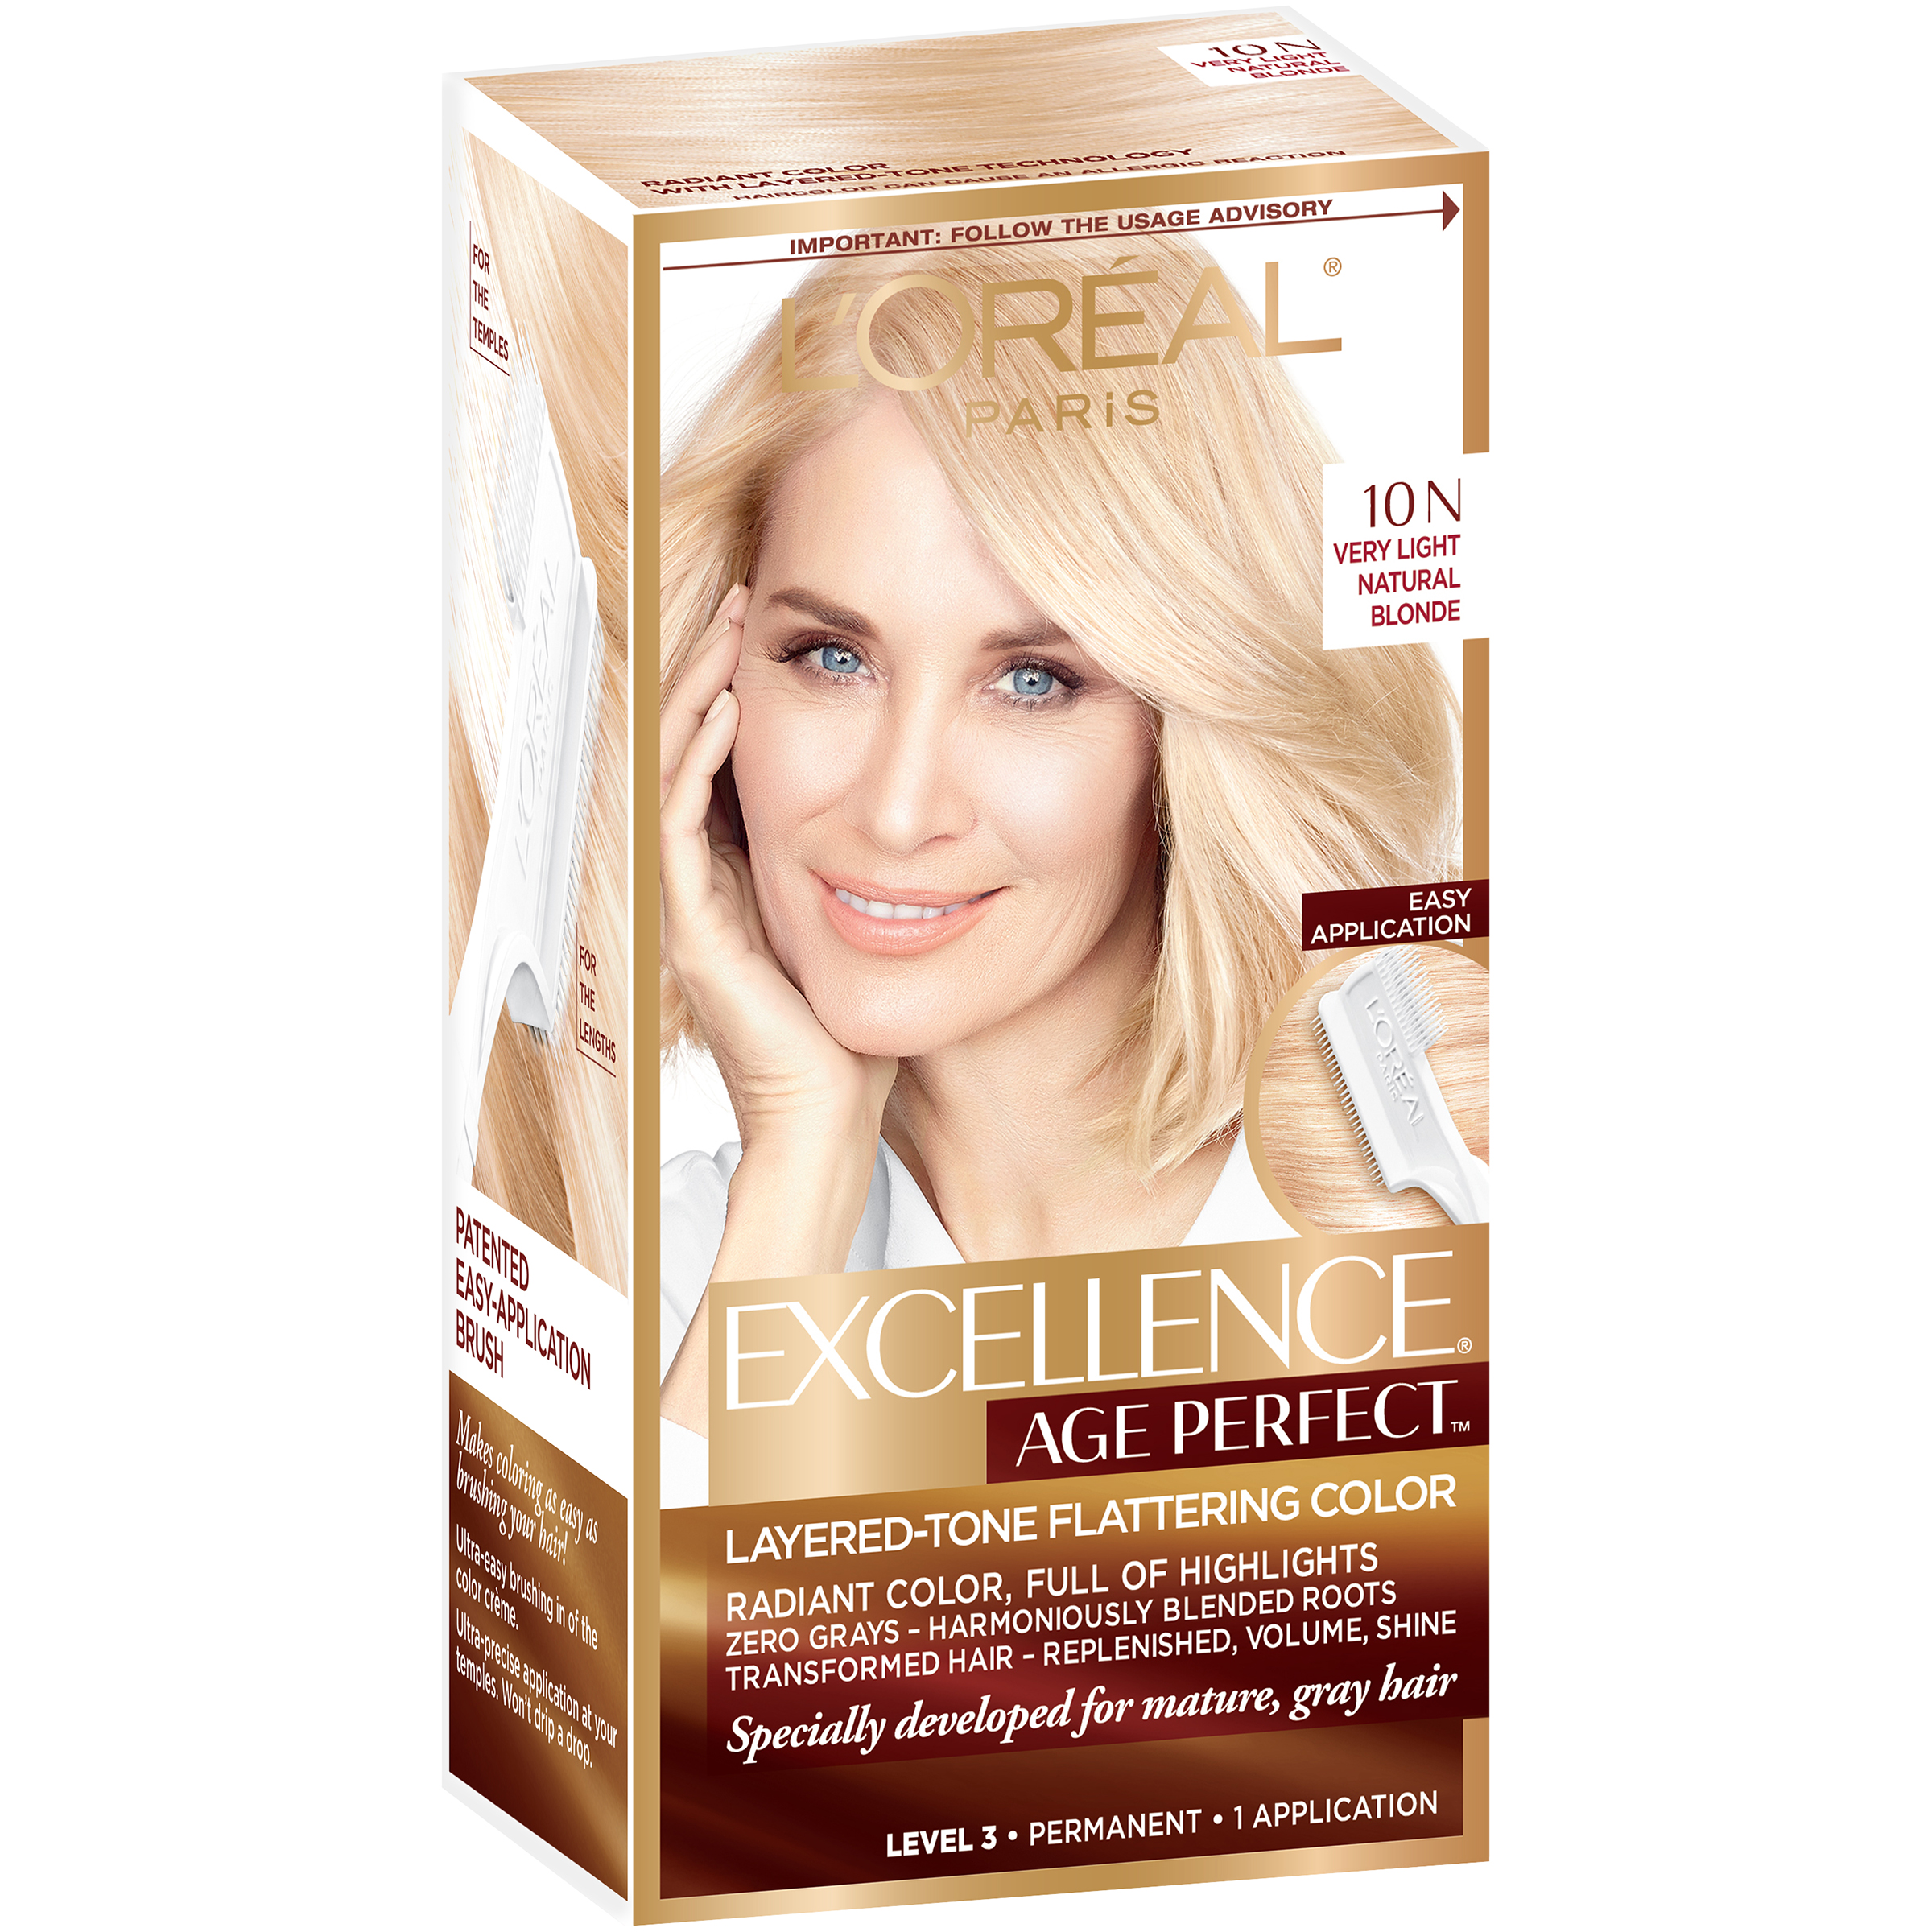 Konsep Penting 53+ L Oreal Hair Color Excellence